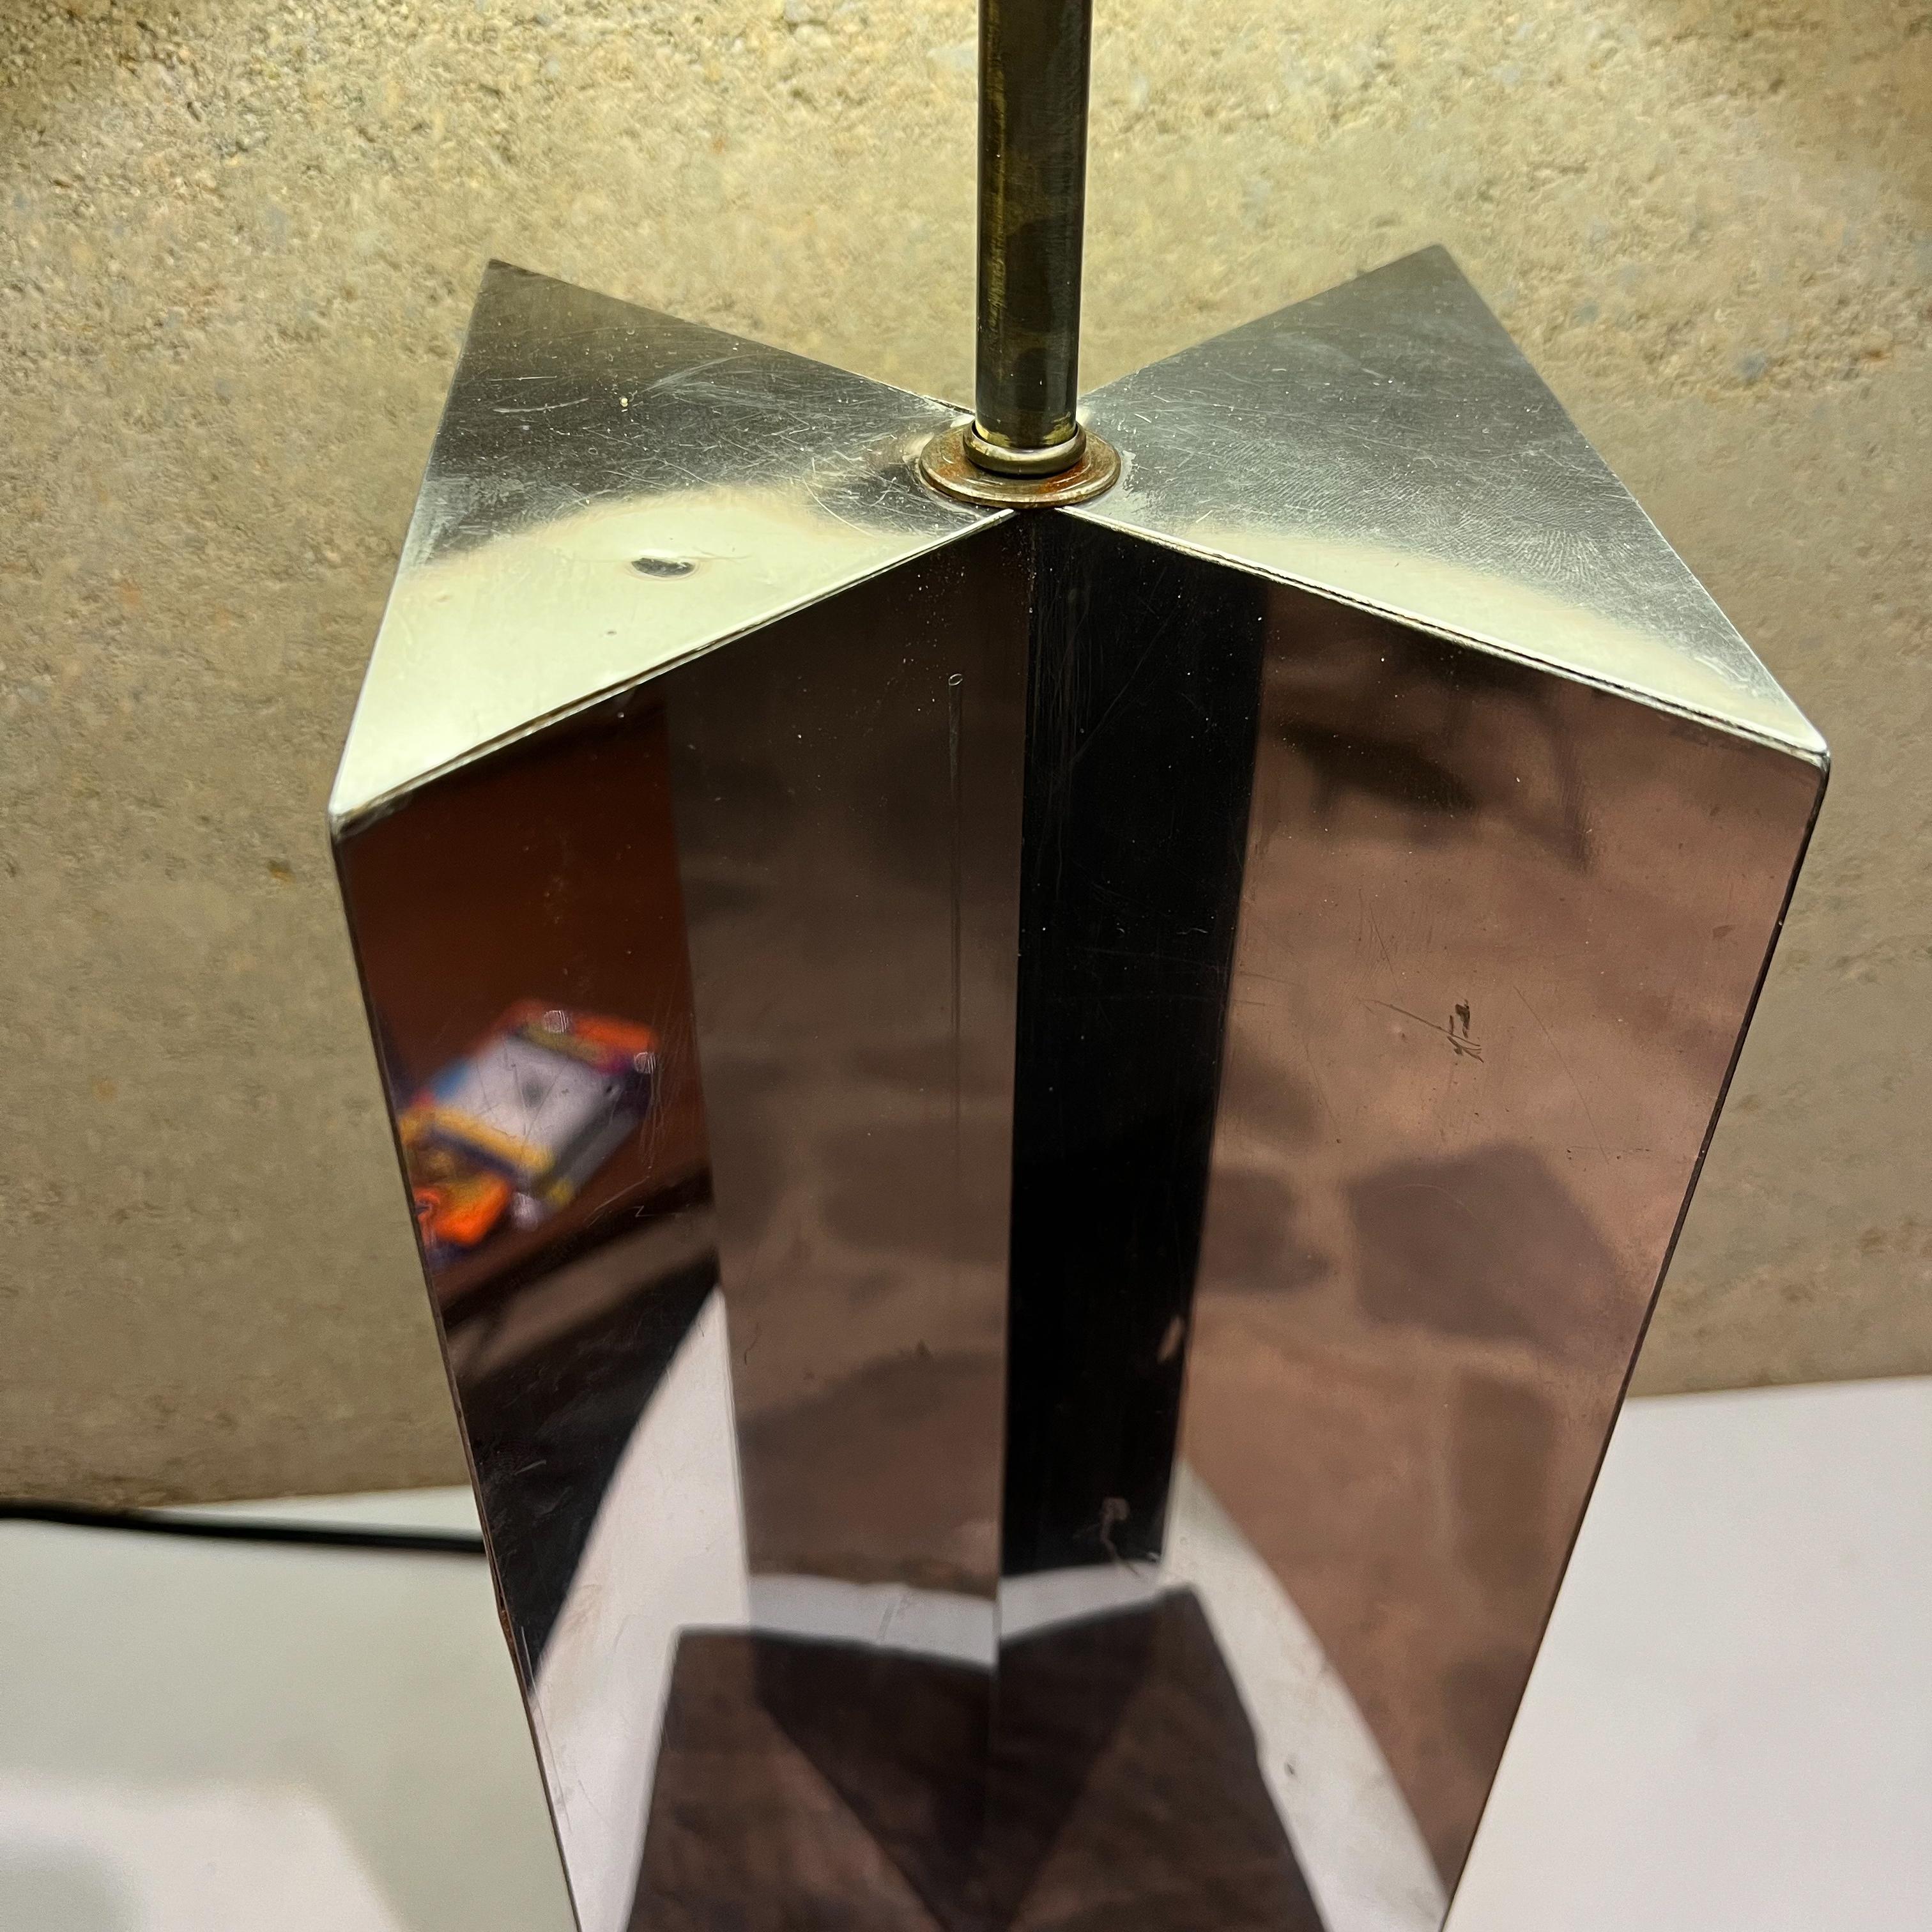 1970s Mid-Century Modern geometric citiscape modern chrome table lamp 
Style of Paul Evans
Unmarked
Chrome plated stainless steel mounted on exotic wood.
MJeasures: 25.5 tall x 8 wide x 8
Preowned original unrestored vintage condition. No lamp